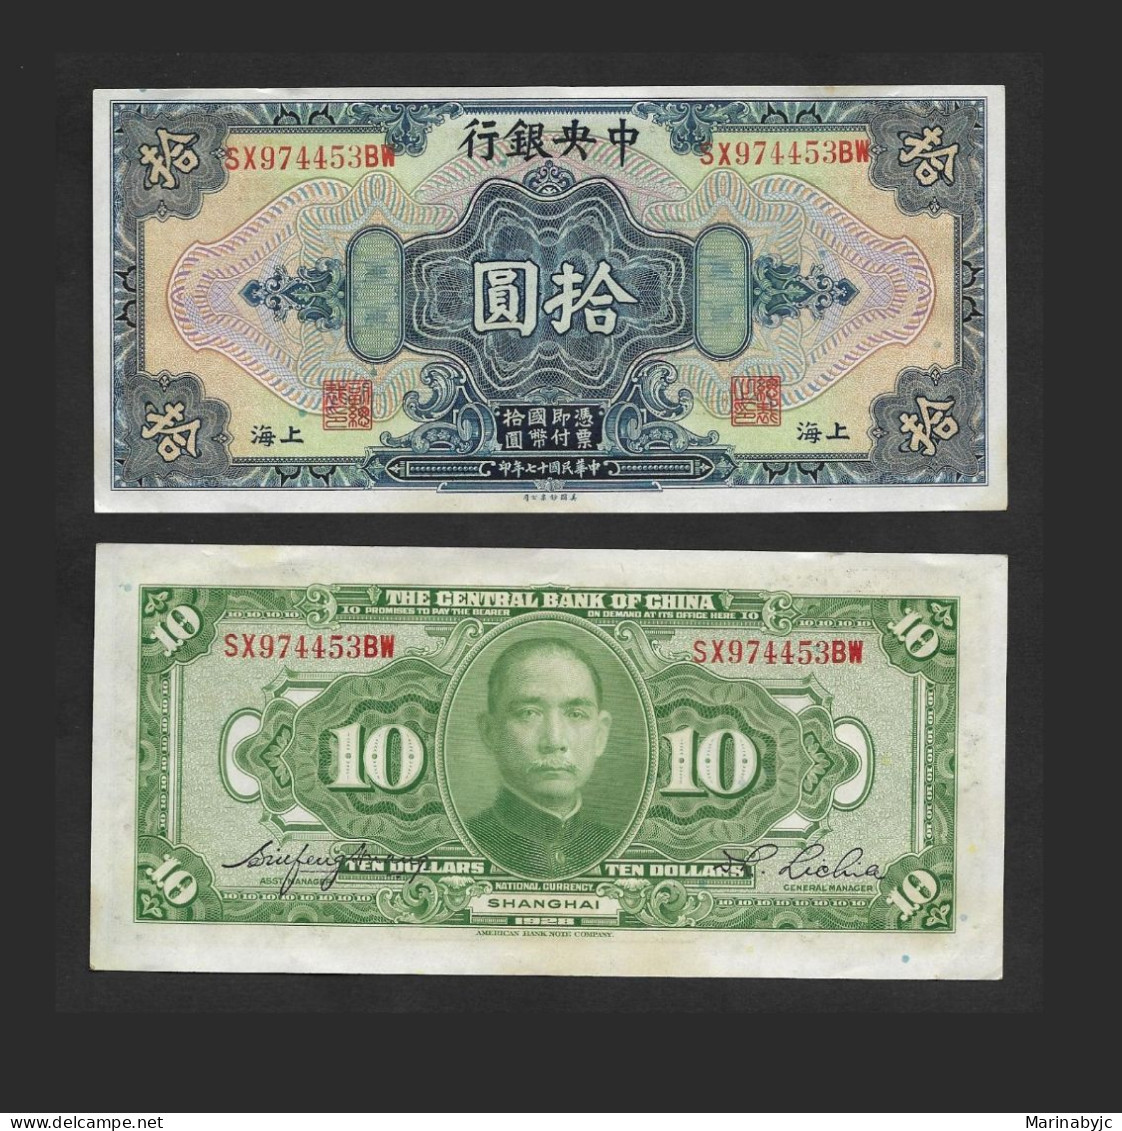 EL)1949 CHINA, 10 DOLLAR BILL FROM THE BANK OF THE REPUBLIC OF CHINA, WITH REVERSE, VF - Used Stamps